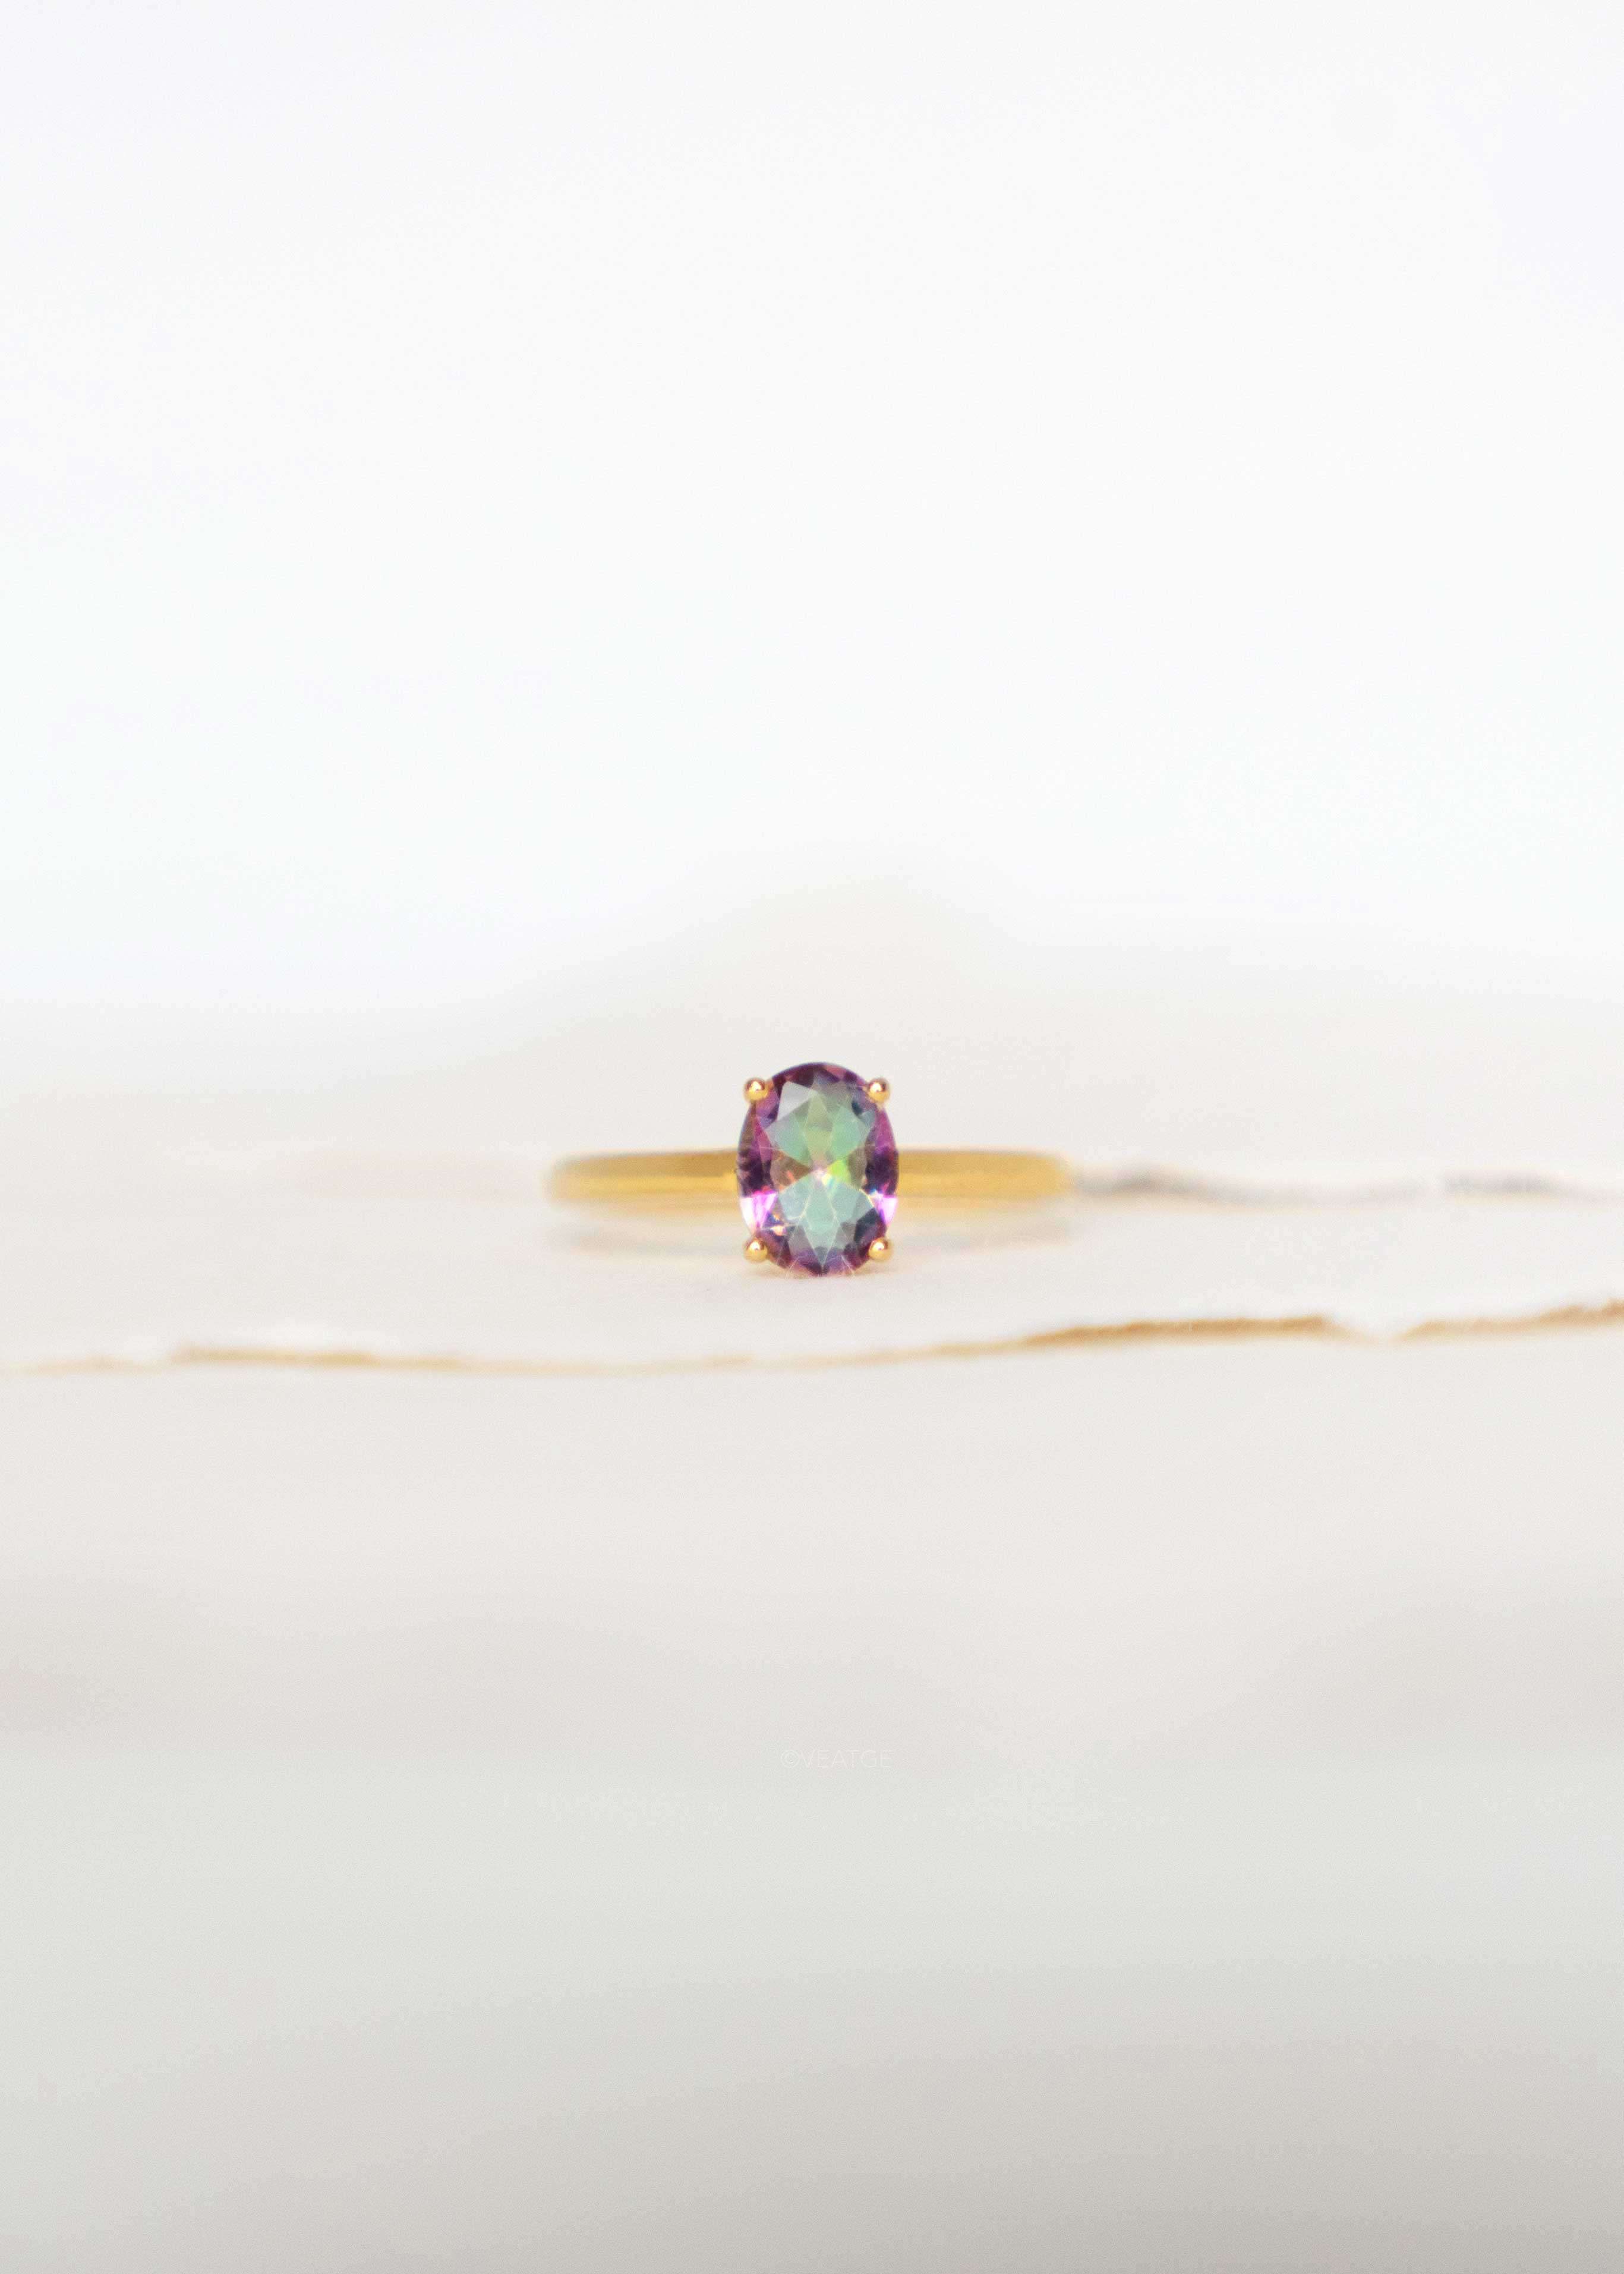 Mystic Topaz Ring in Gold Vermeil gifts for women gift for her gemstone ring